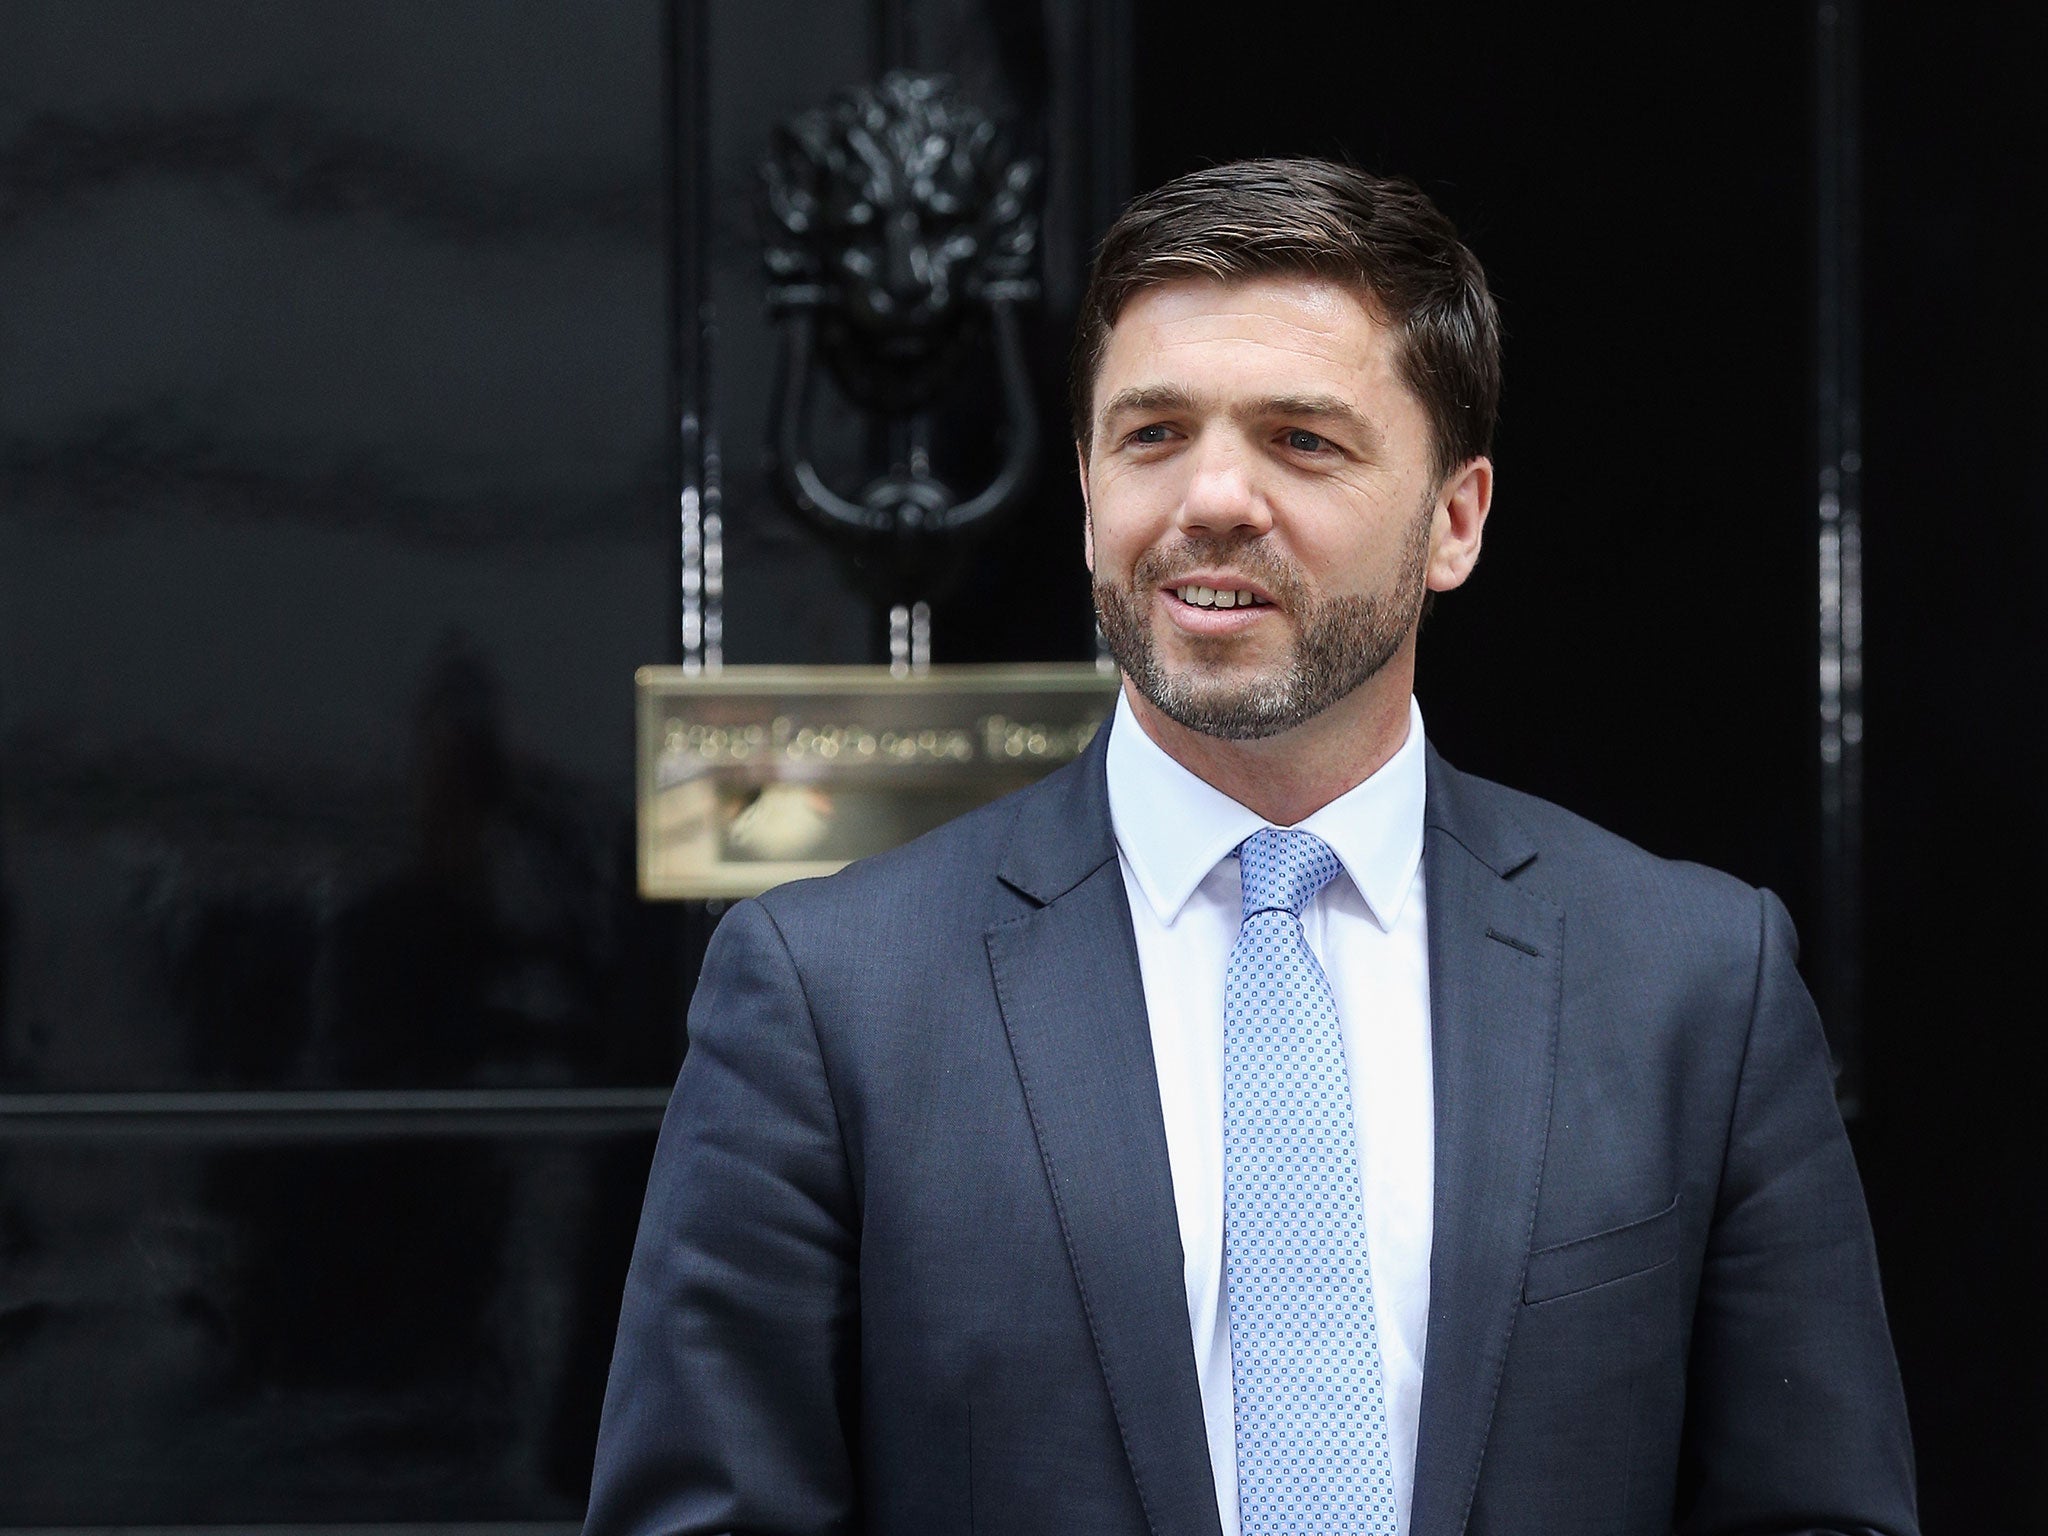 Stephen Crabb, the new Welsh Secretary, pictured leaving Downing Street on 15 July, 2014